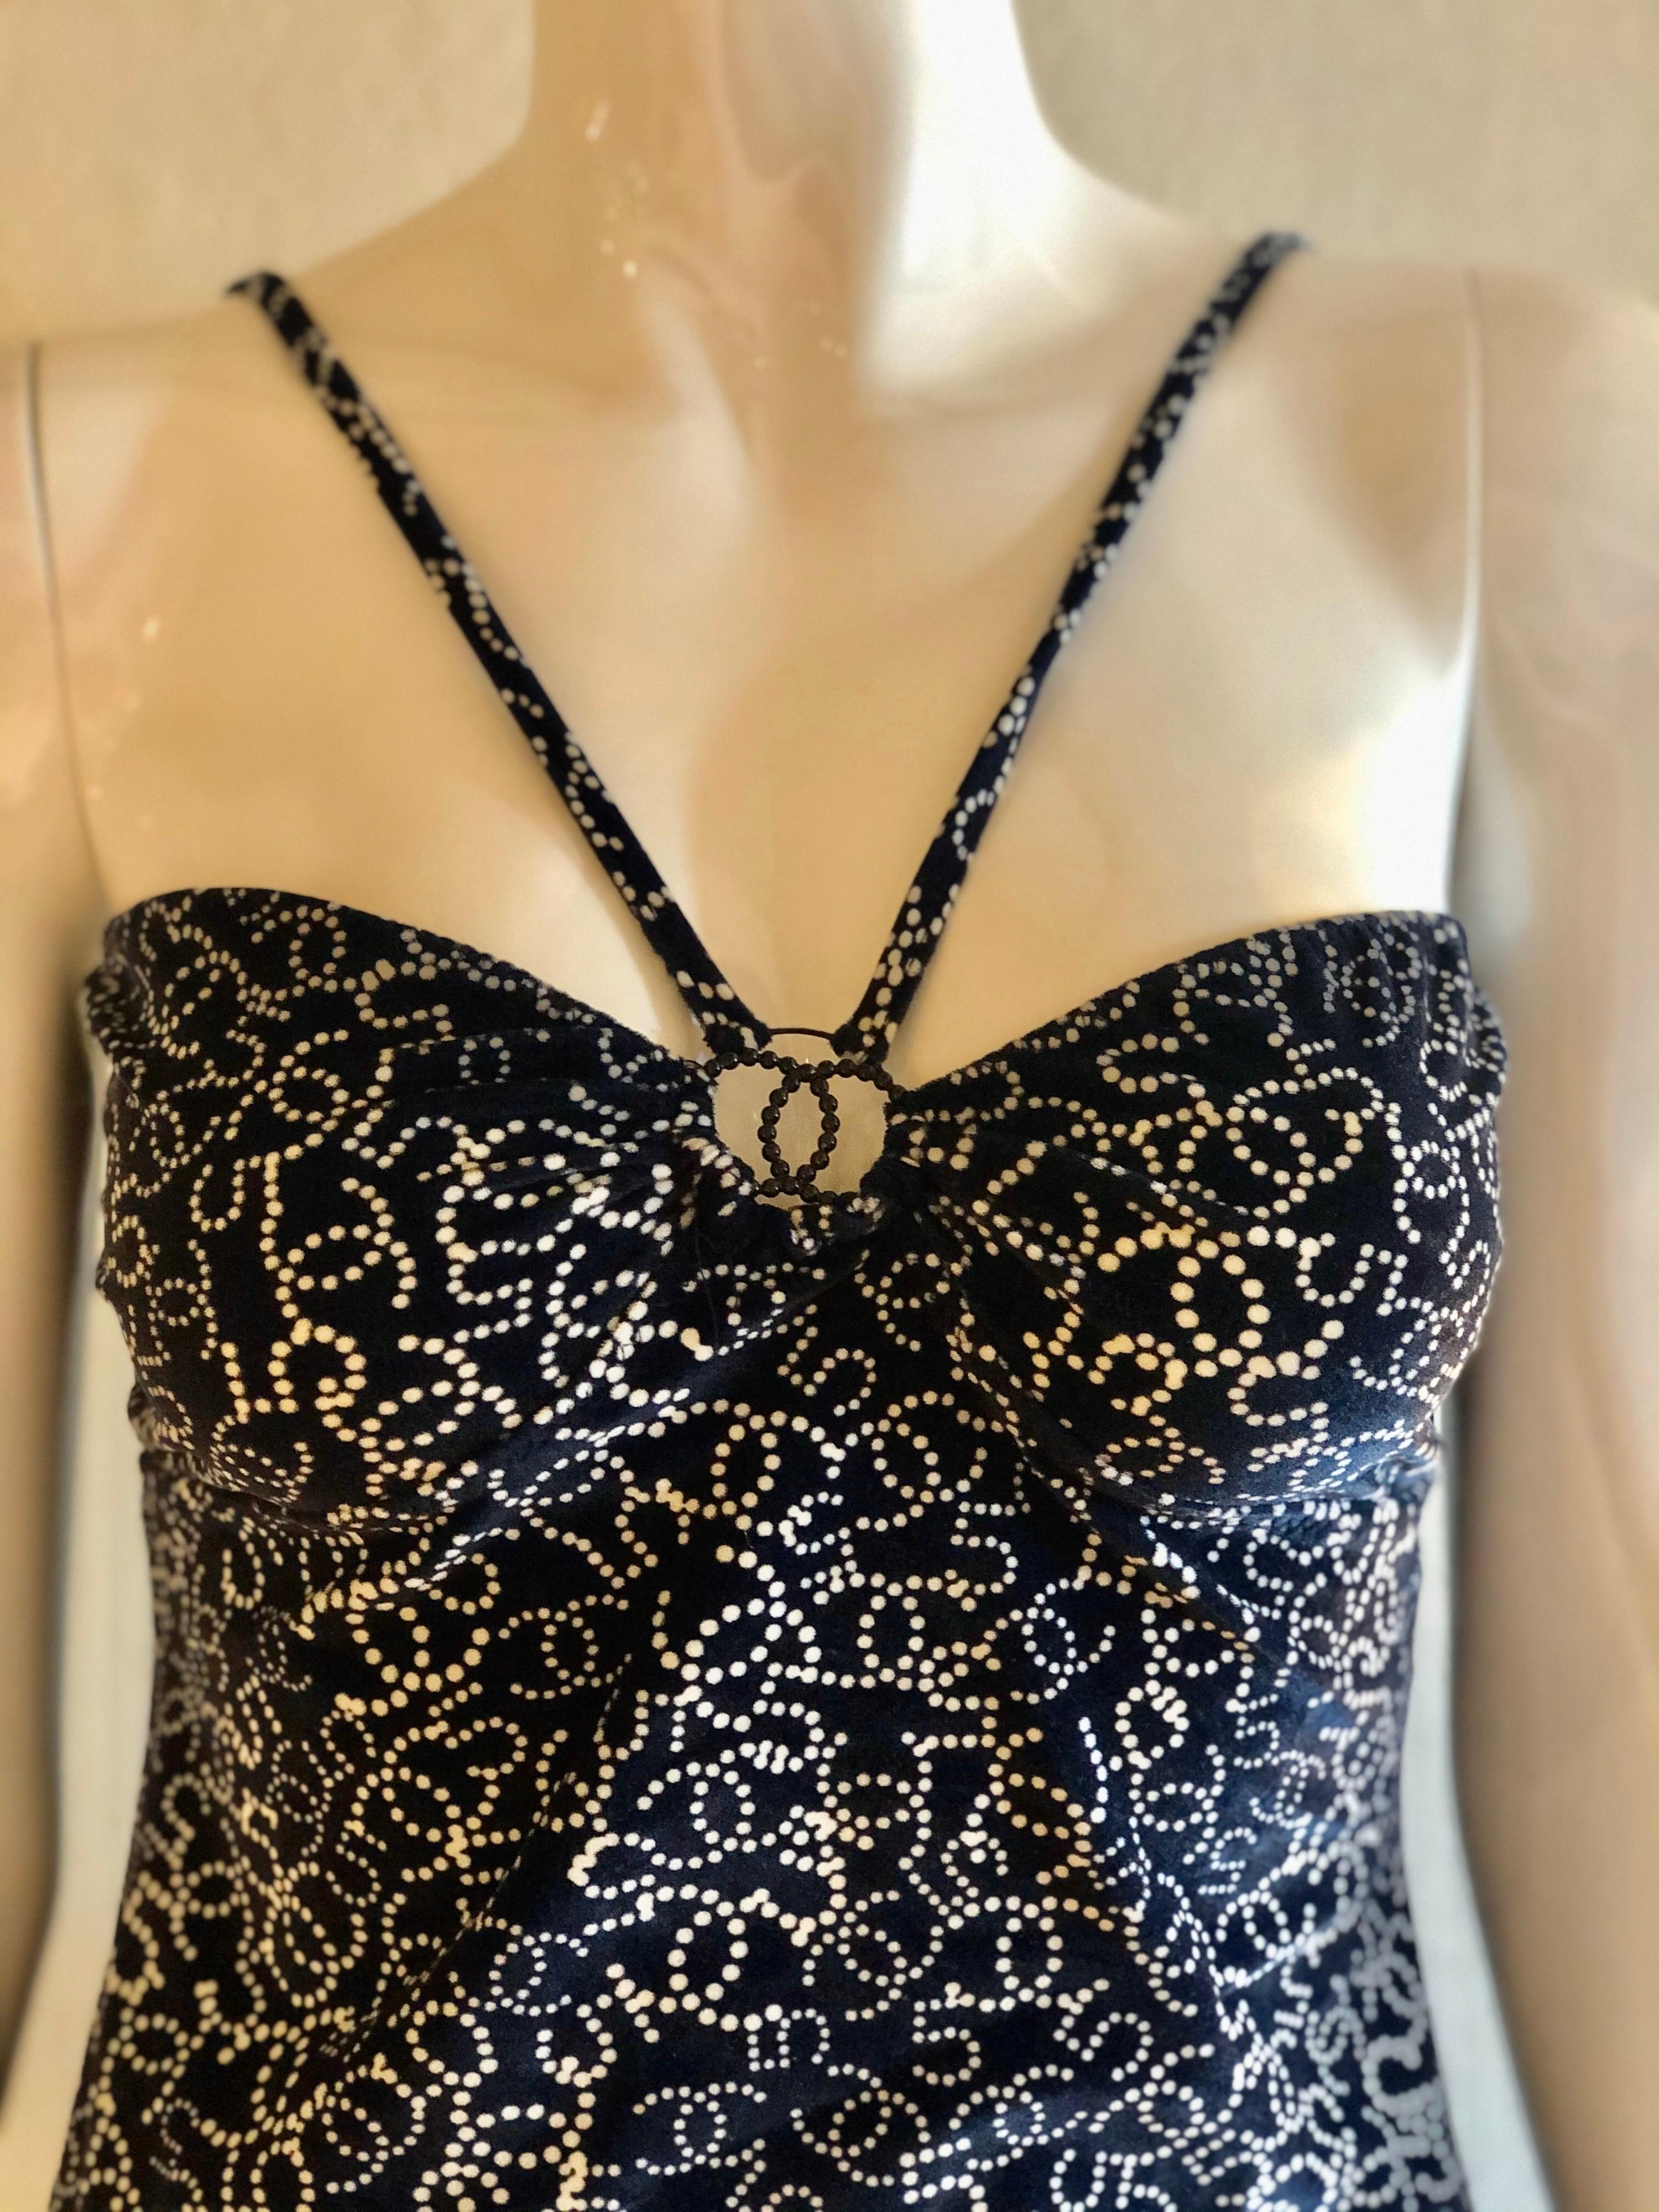 Say hello to the perfect midnight blue and cream Chanel velour camisole with interlocking CC logo/Number 5 print throughout, featuring beaded interlocking CC hardware. Hook closure in the back. This piece is from Chanel's Spring 2006 Collection. Sz